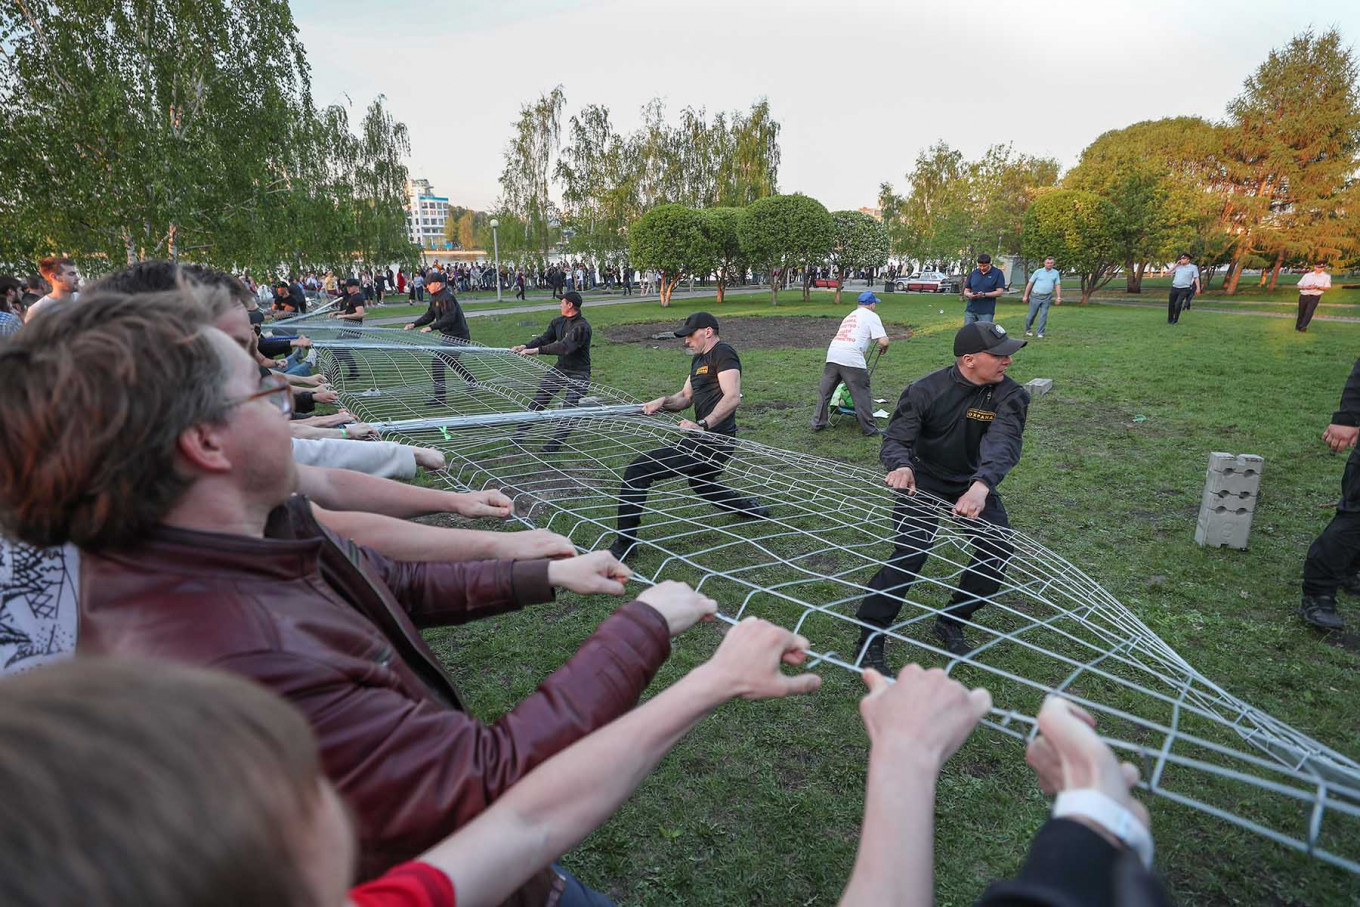 Russian Protesters Clash With Vigilantes Over Church Construction Site, in Photos